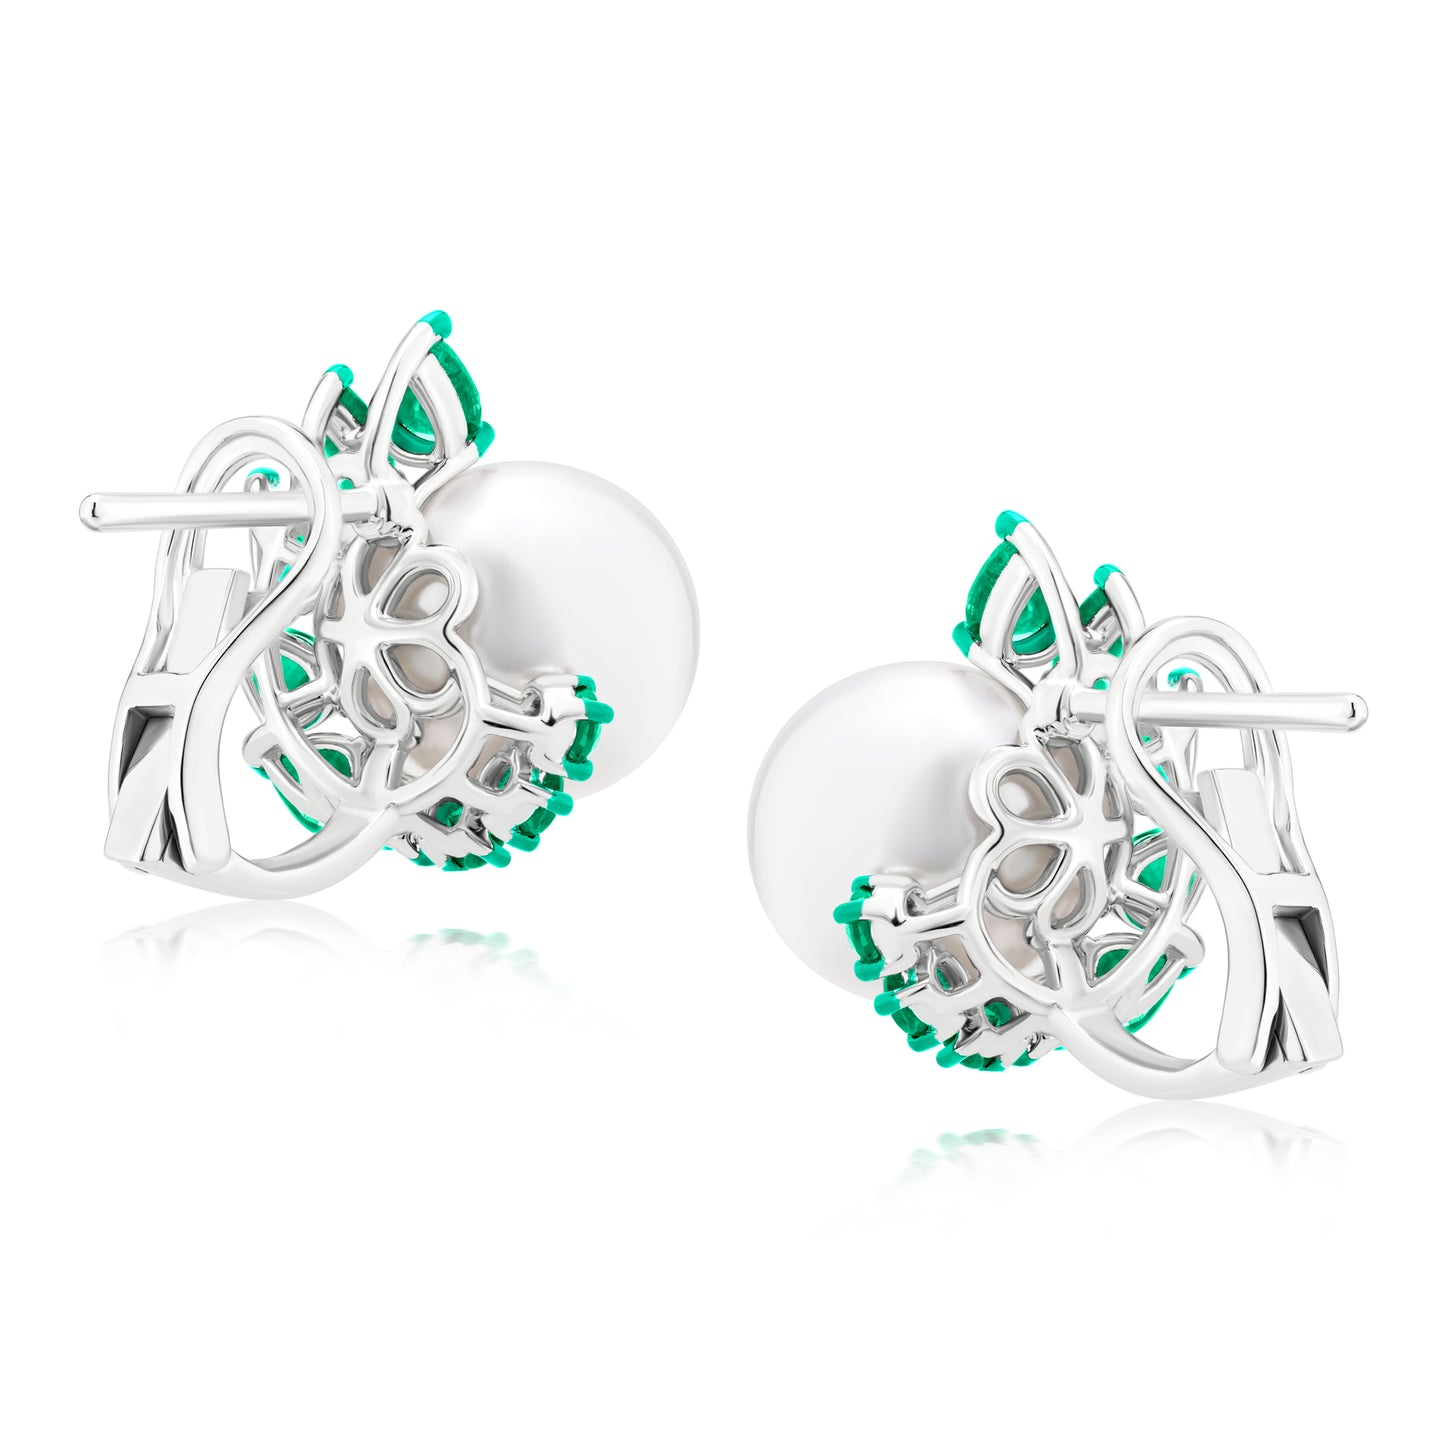 Earring With Pearl And Emerald In 18K White Gold And Green Rhodium